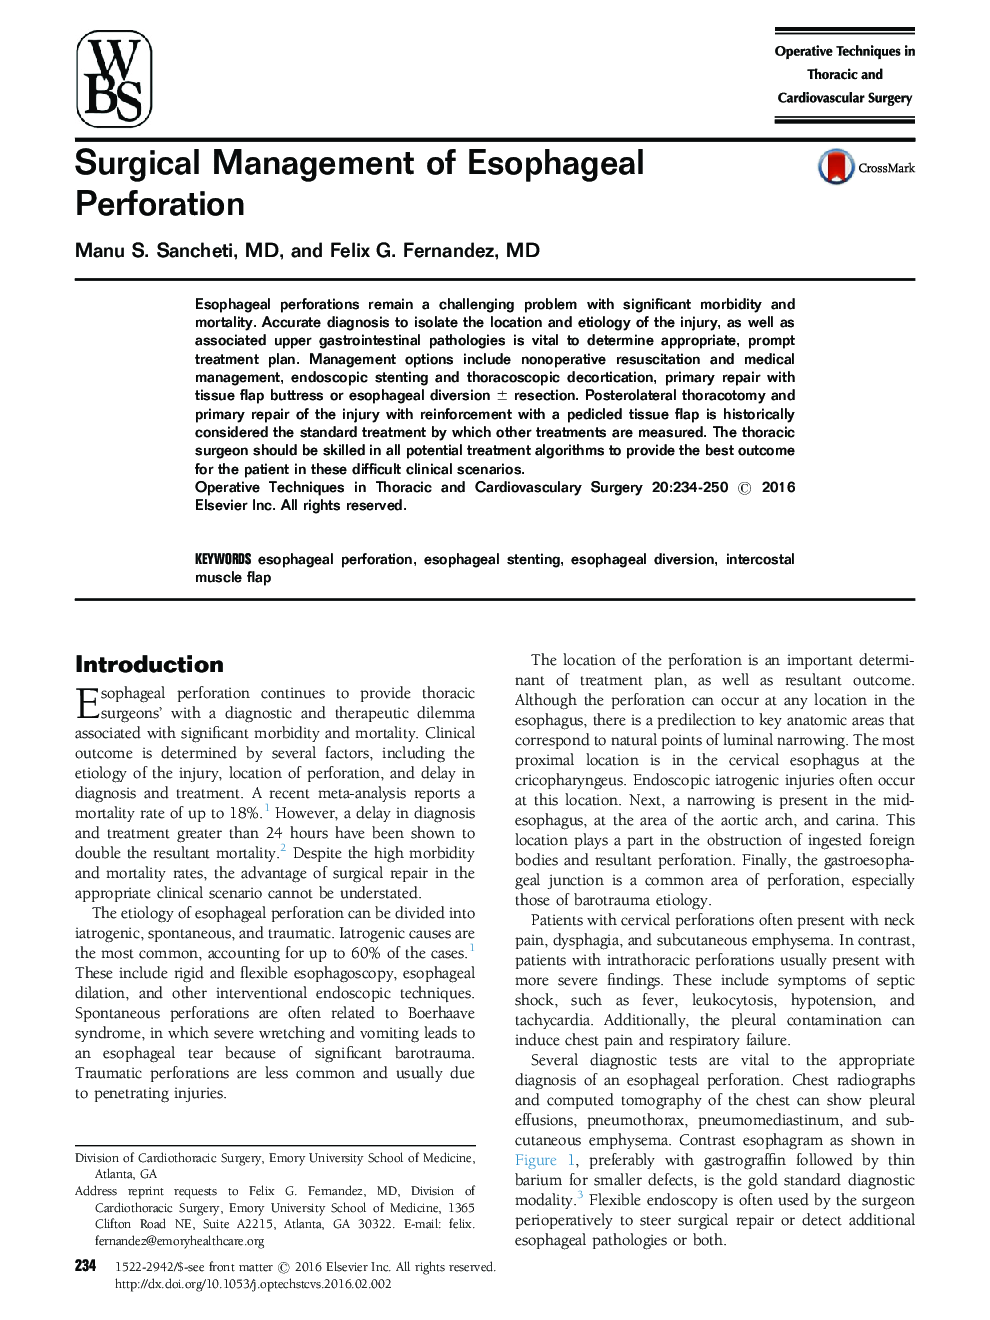 Surgical Management of Esophageal Perforation